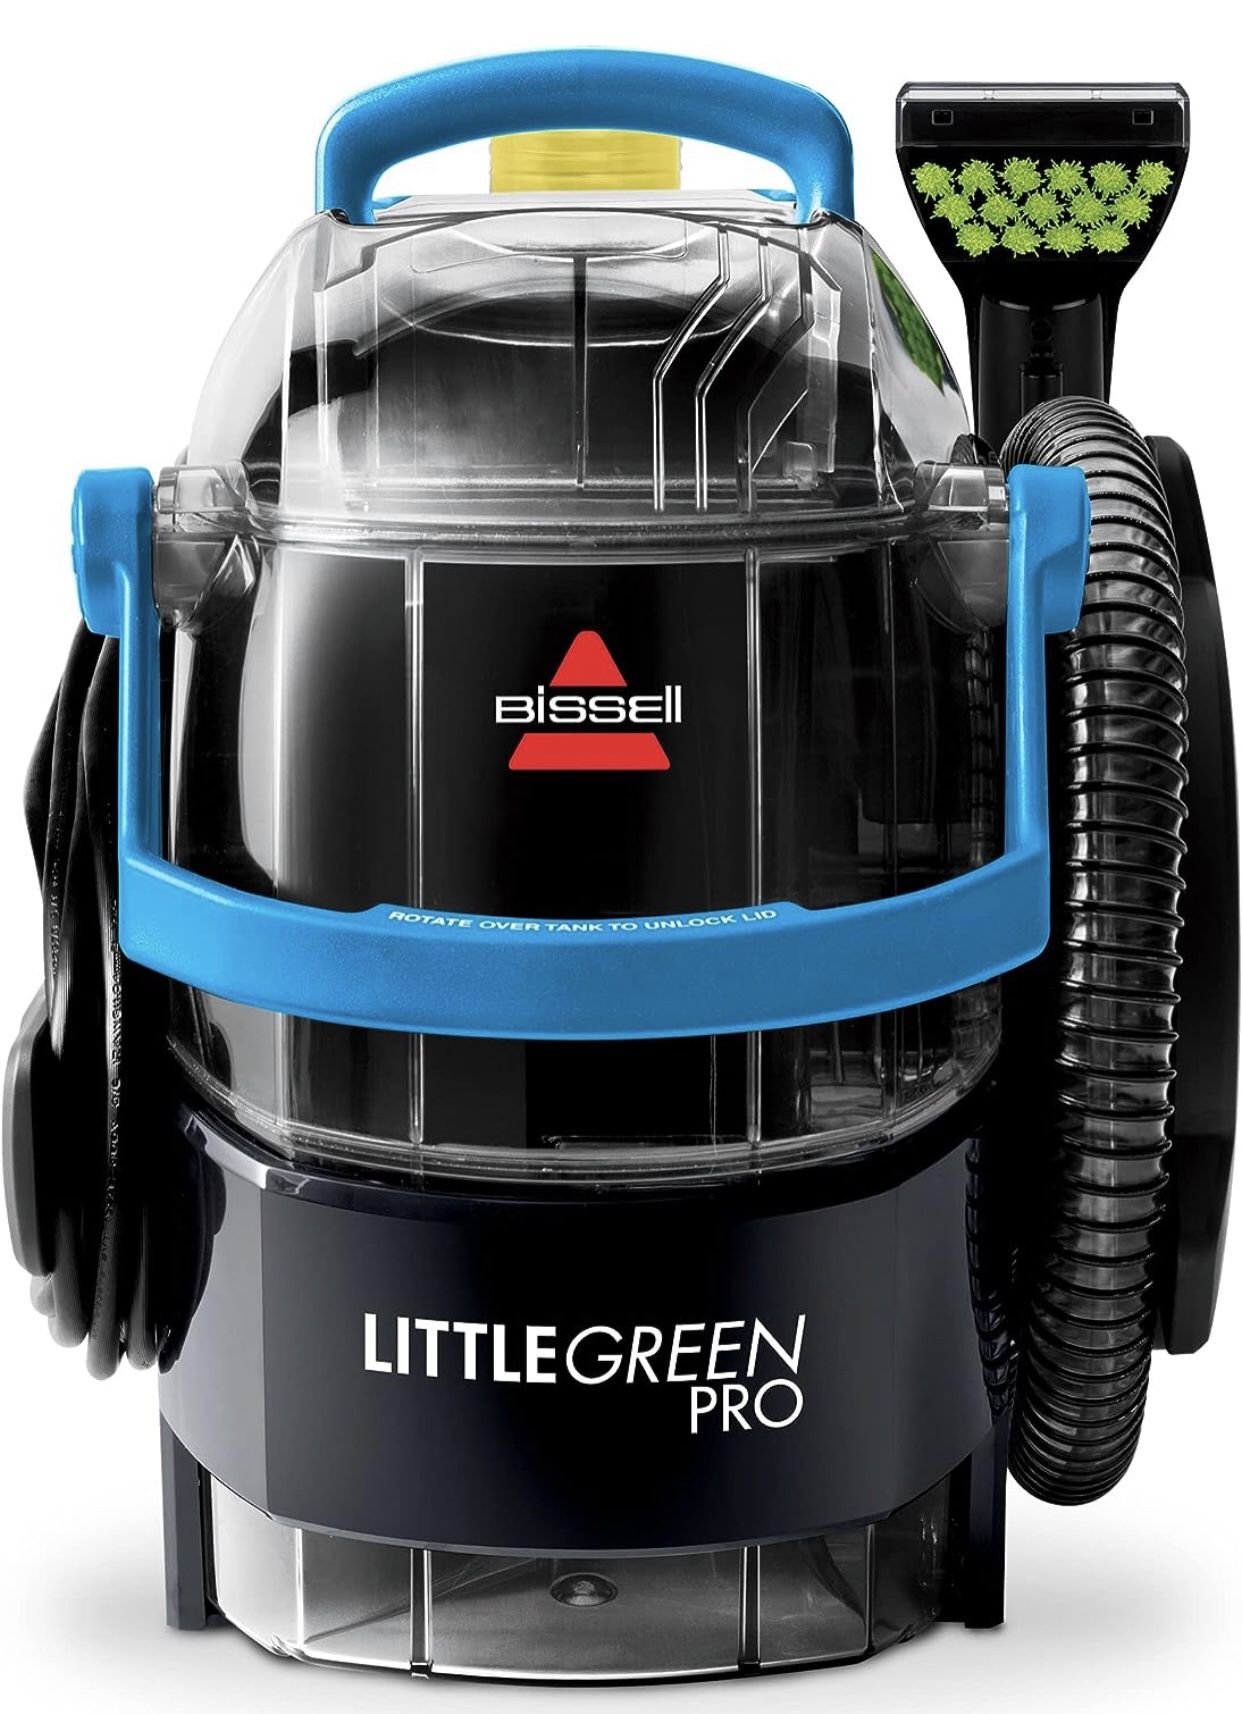 BISSELL Little Green Pro Portable Carpet & Upholstery Cleaner and Car/Auto Detailer with Deep Stain Tool, 3" Tough Stain Tool, plus two 8 oz. trial-si